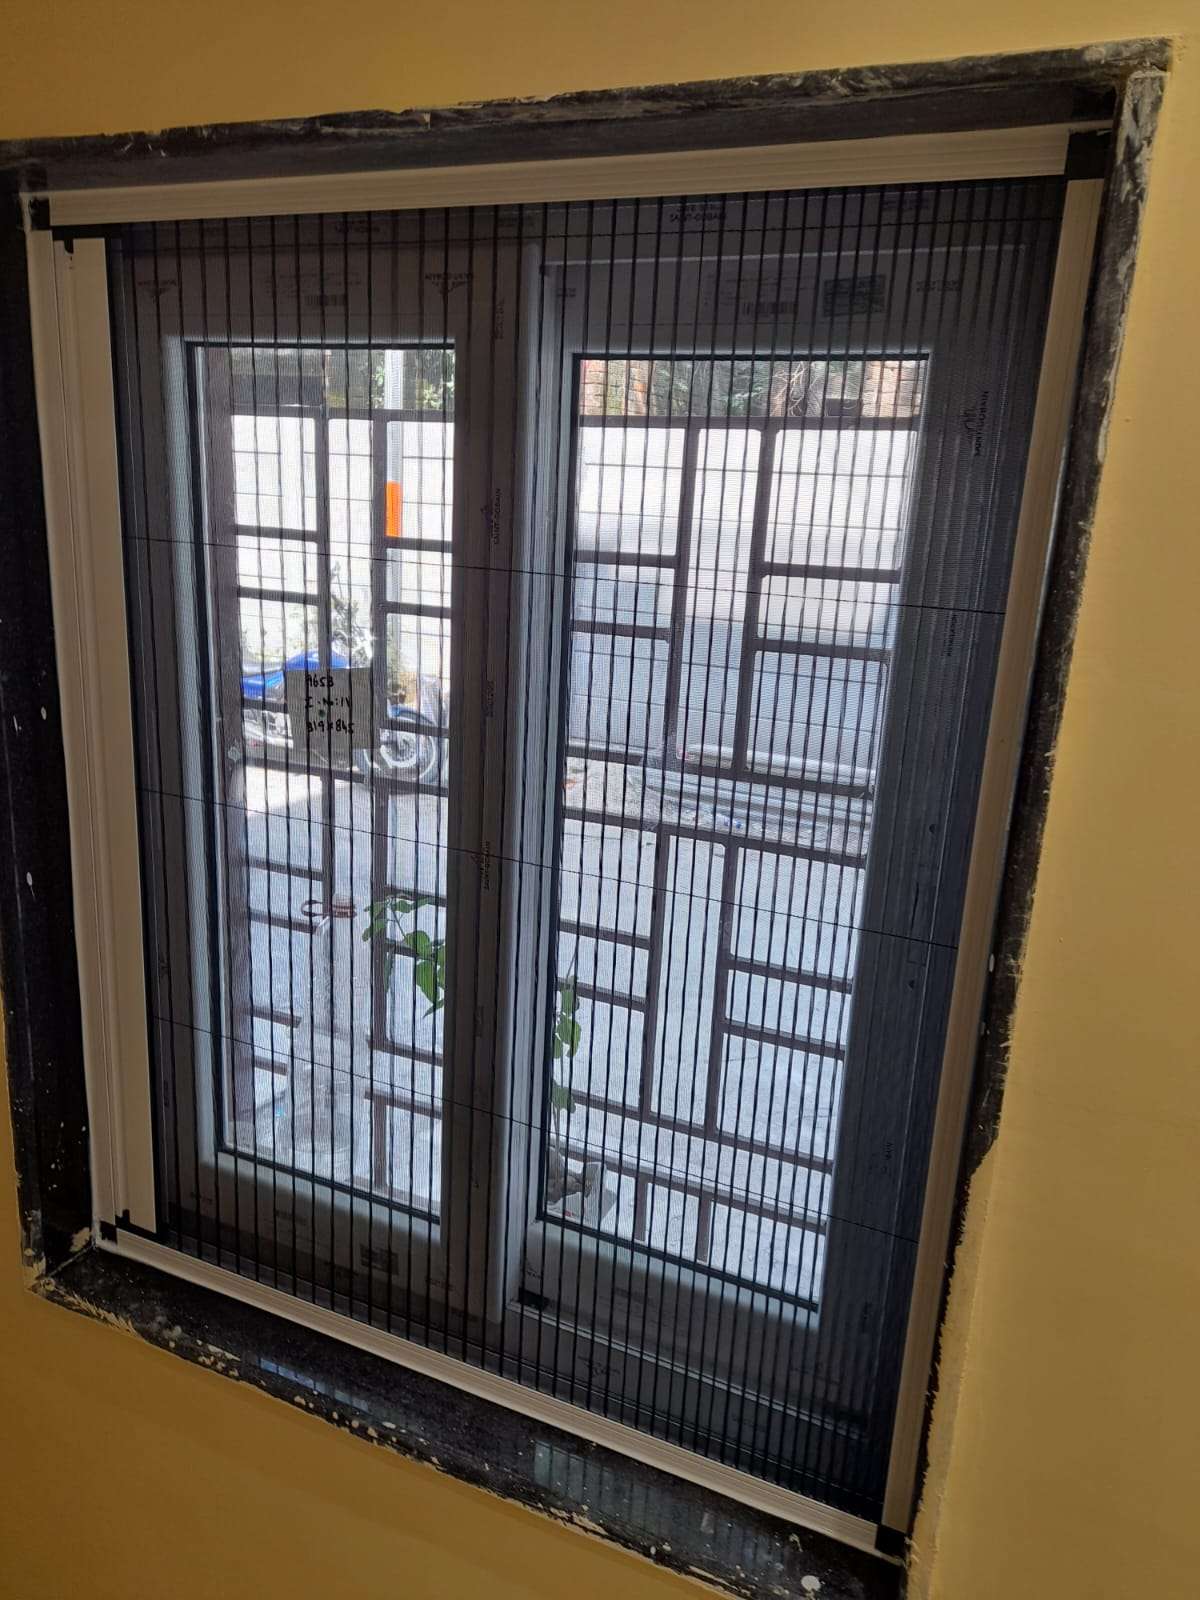 Mosquito nets work as windows and doors, if anyone wants to install them, please call 8700186834 